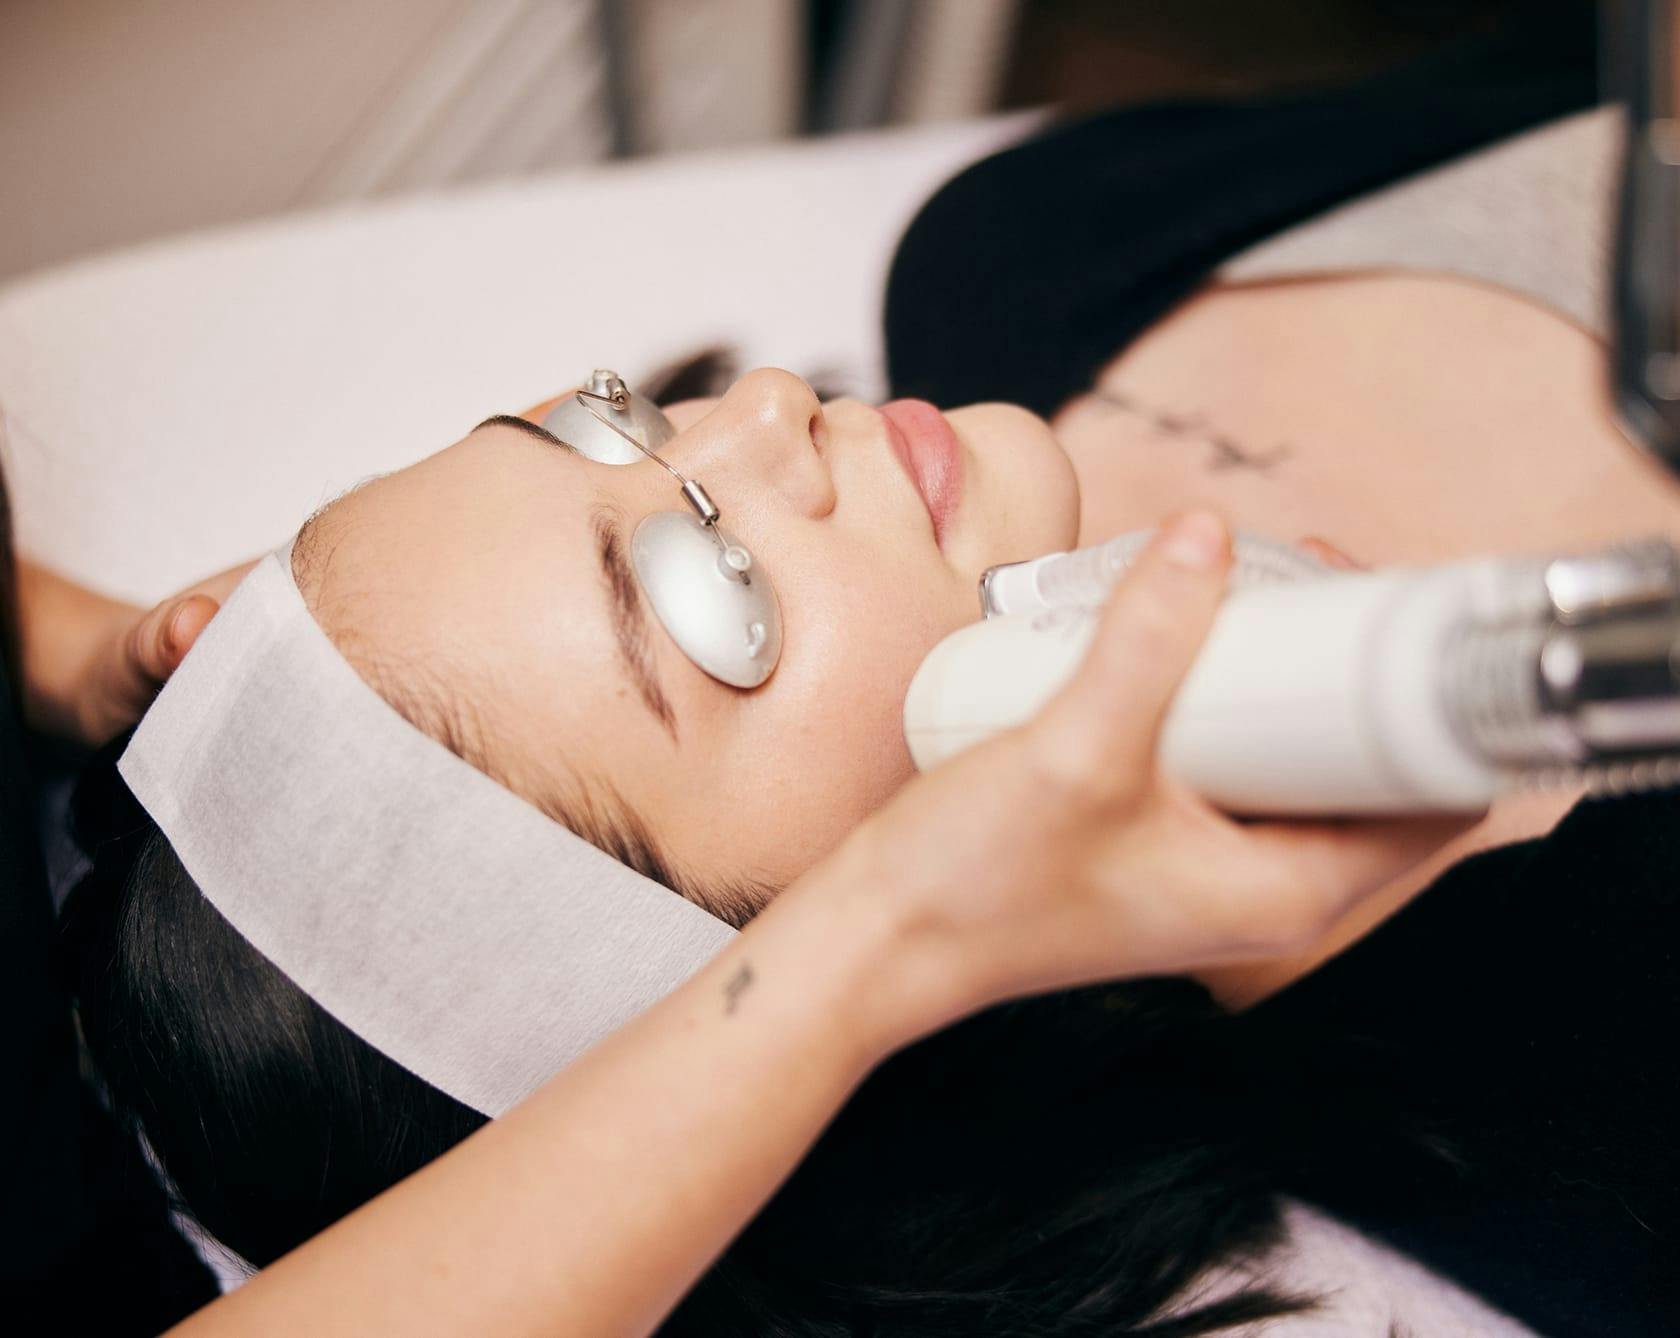 and image of a patient getting a laser facial treatment